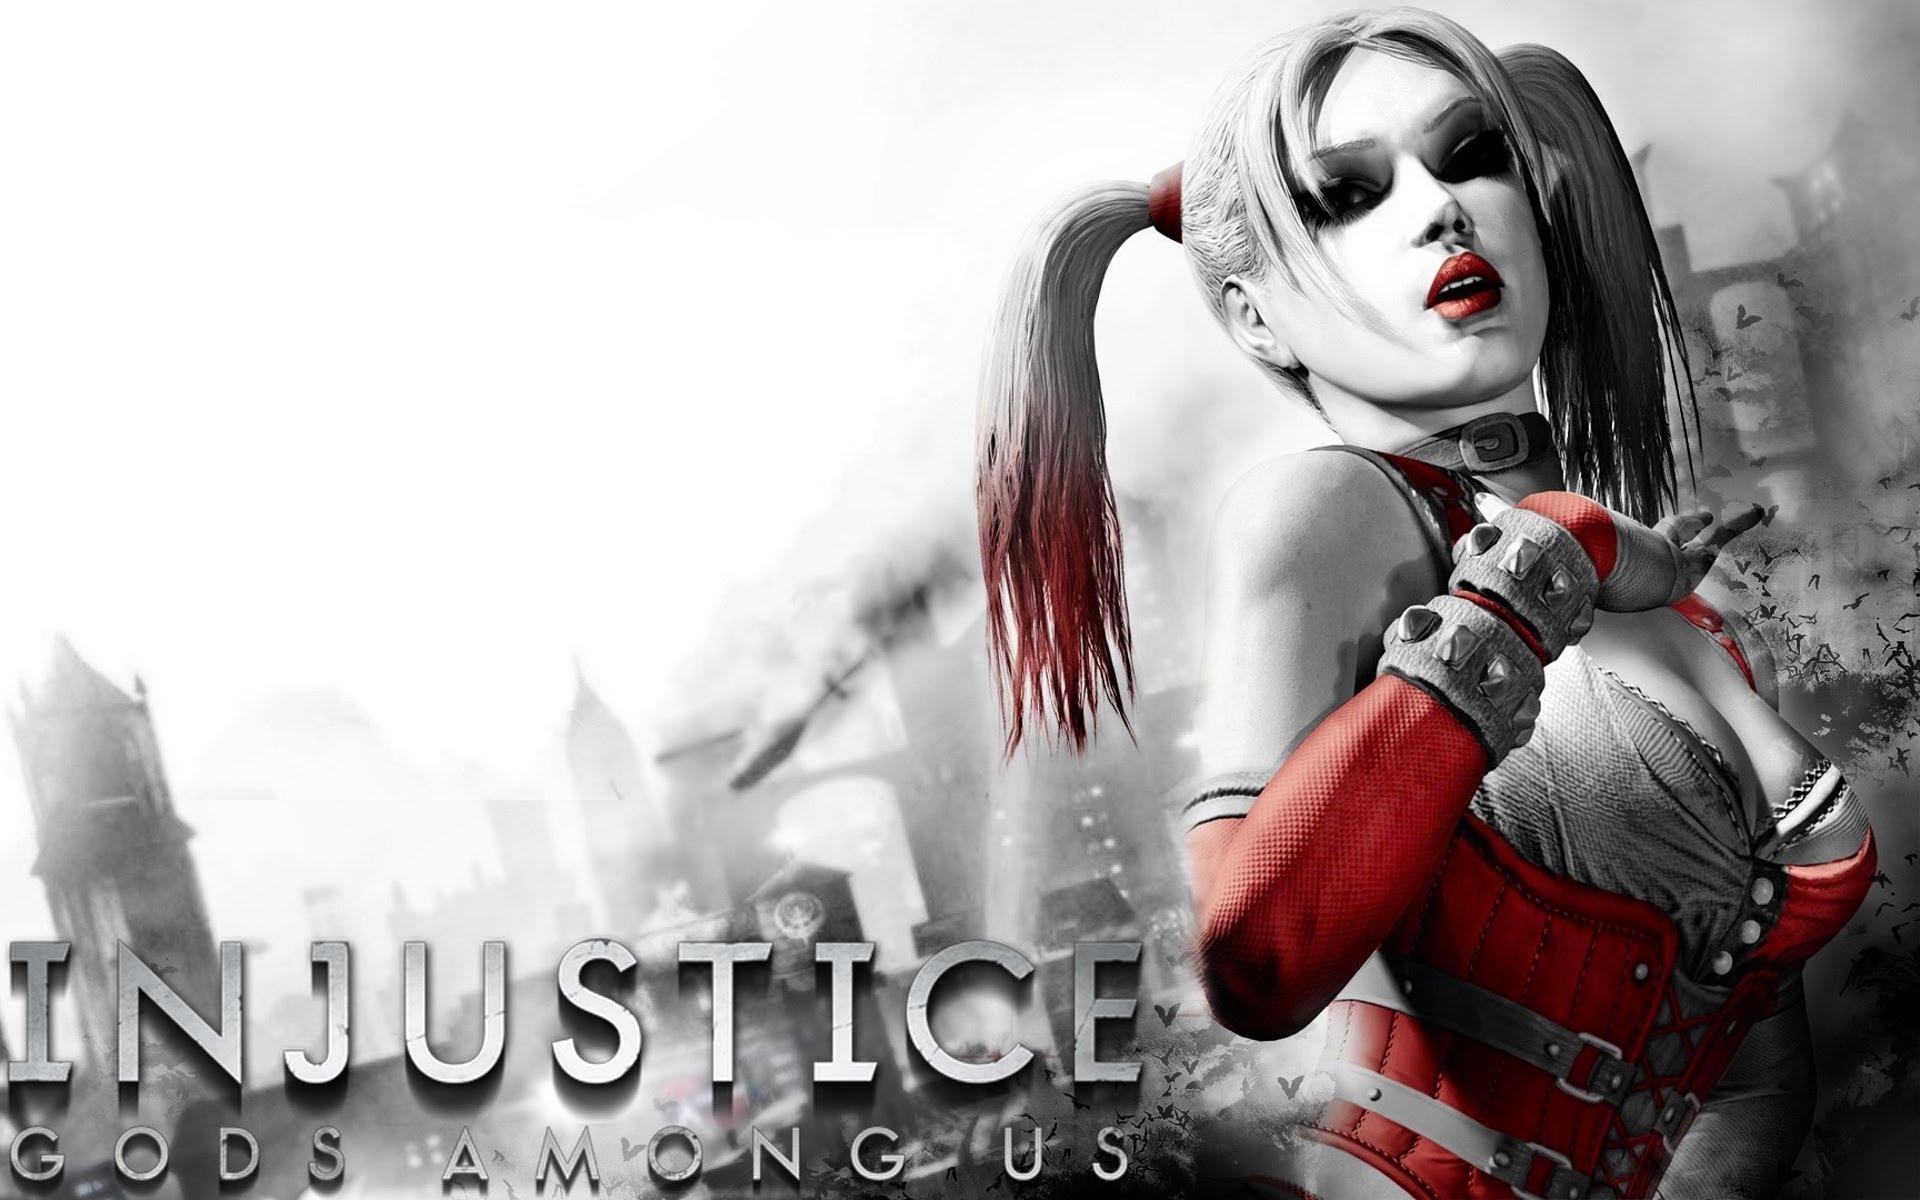 Free download Harley Quinn Background